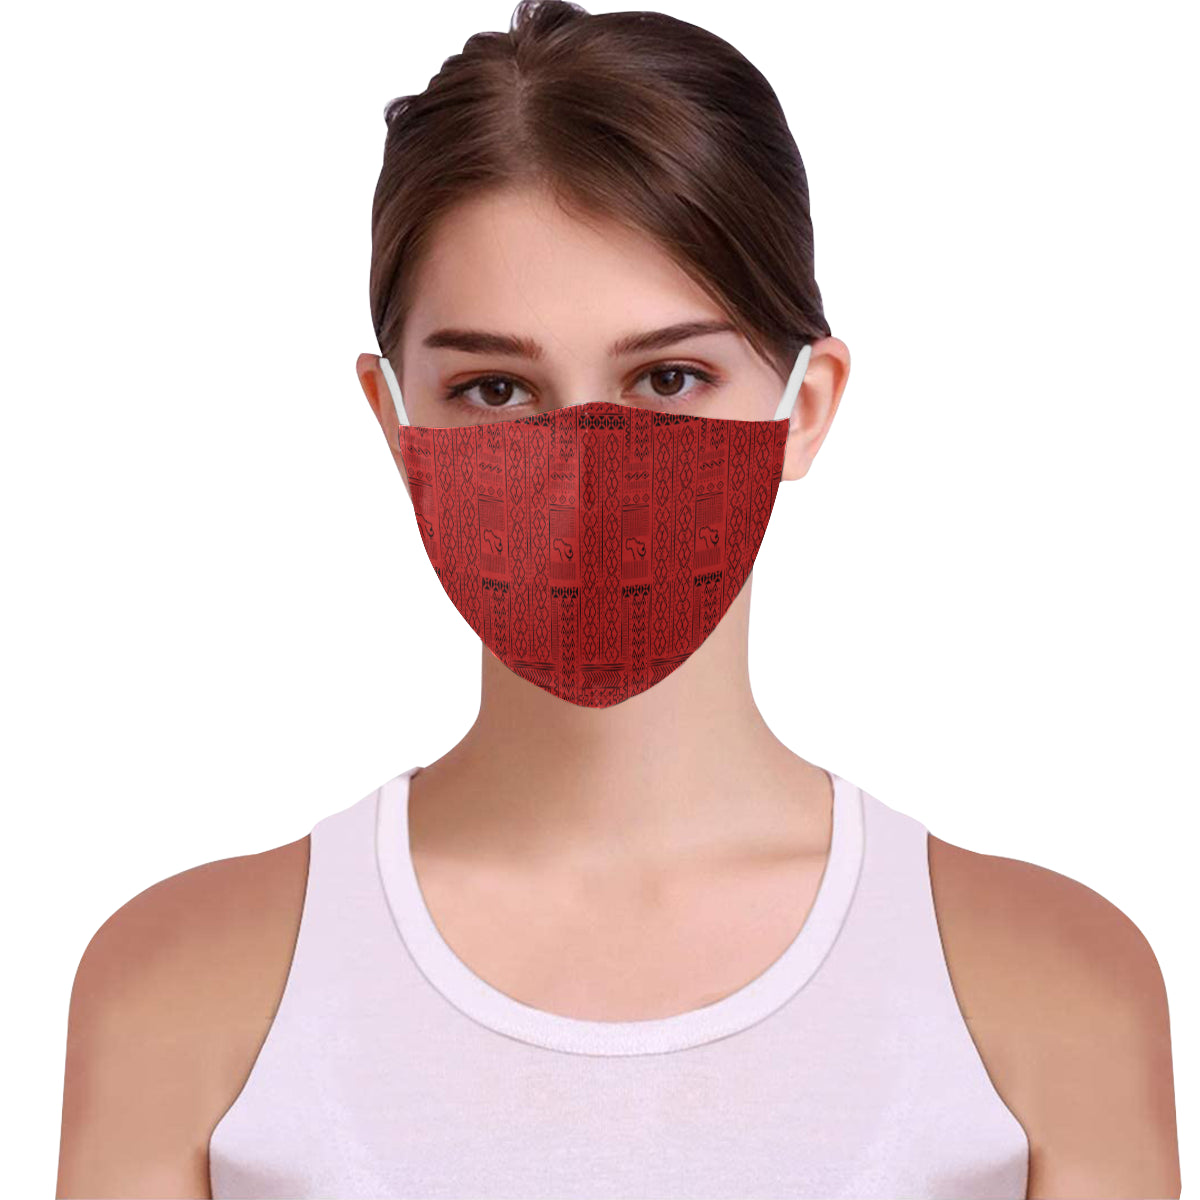 Tribal Print Cotton Fabric Face Mask with Filter Slot & Adjustable Strap (Pack of 5) - Non-medical use